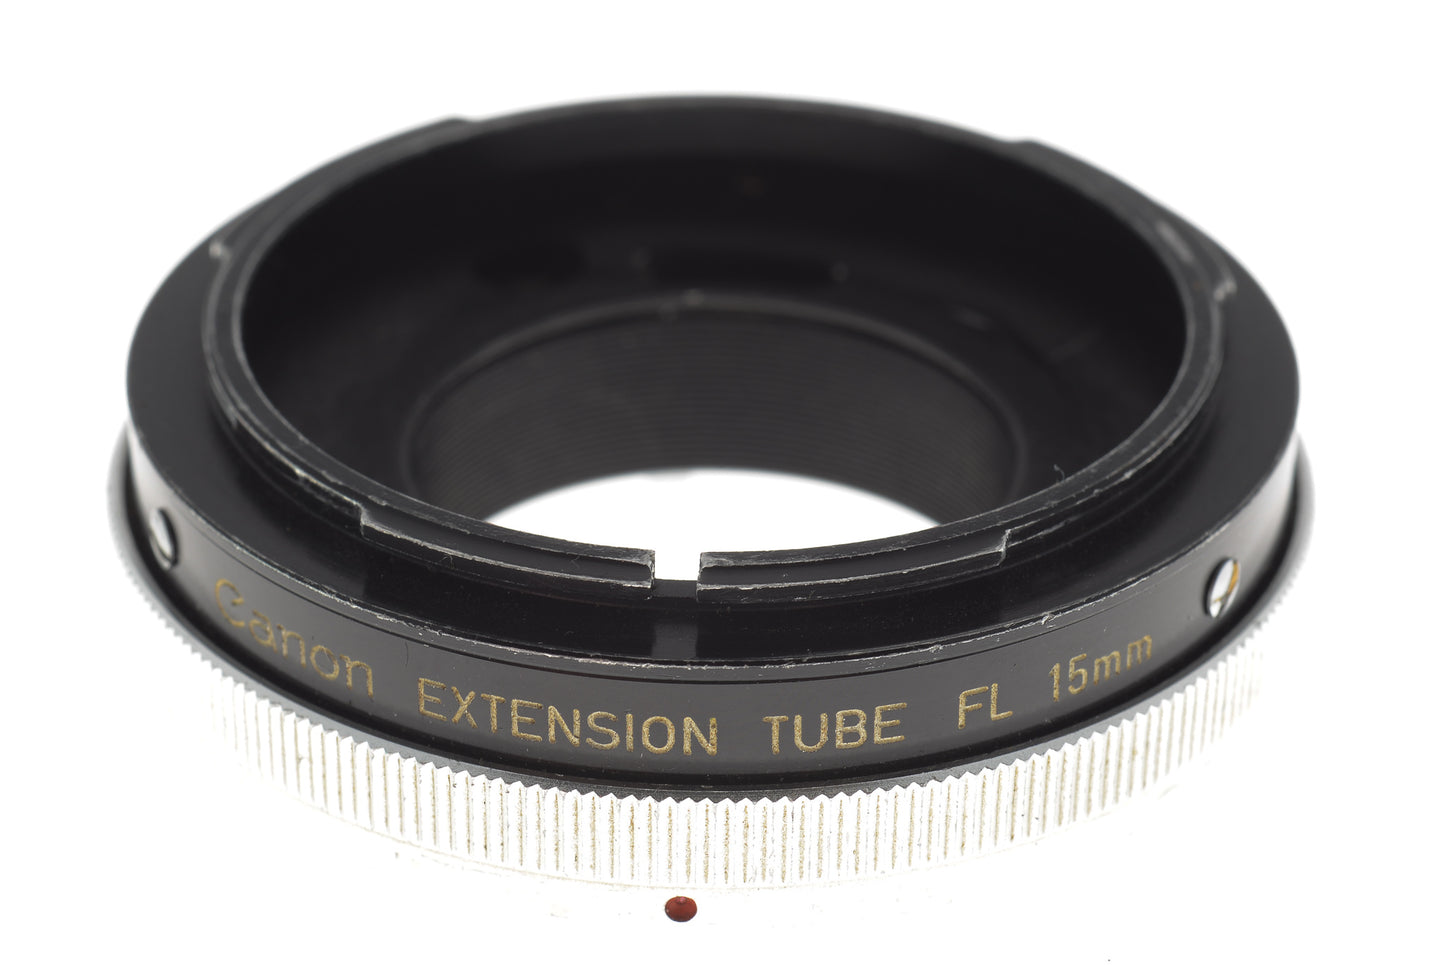 Canon Extension Tube FL 15mm